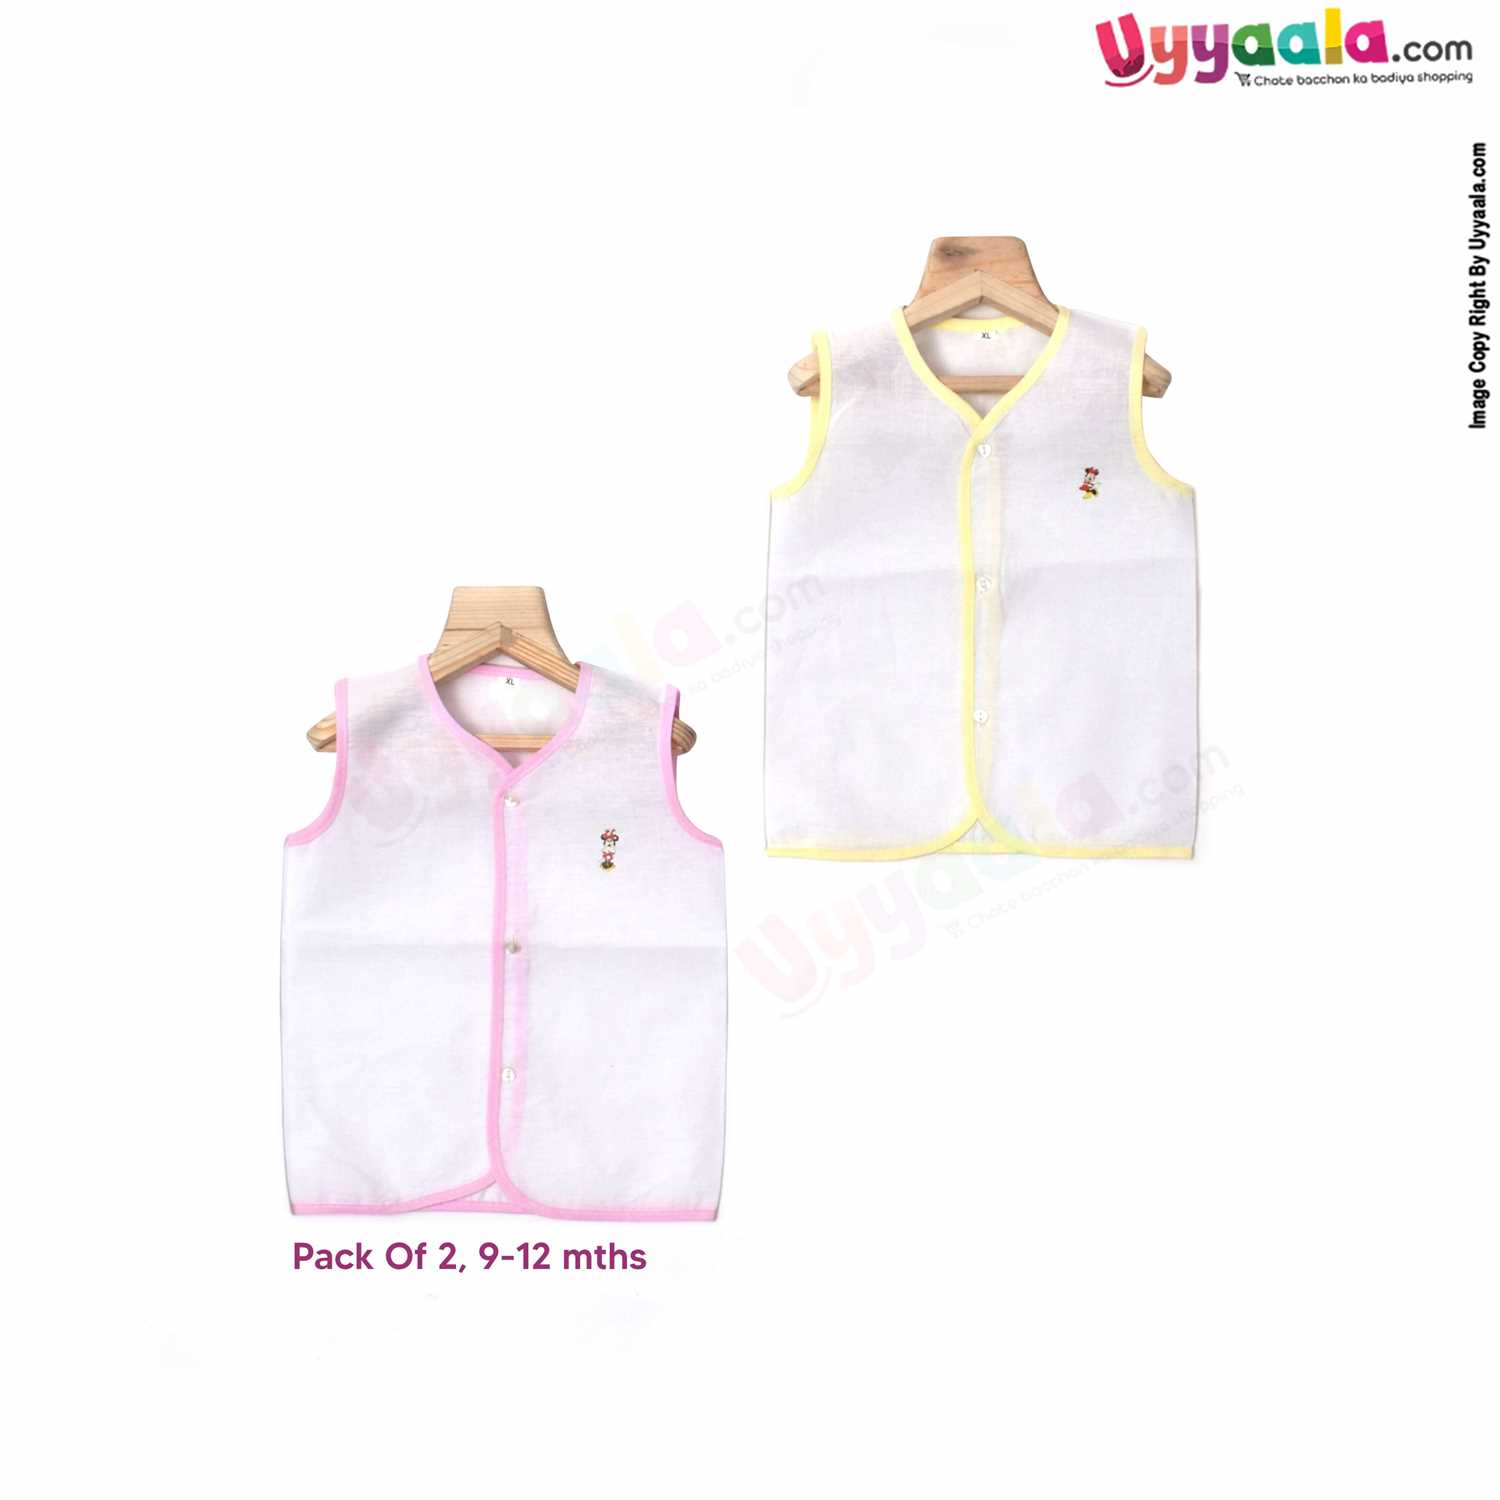 SNUG UP Sleeveless Baby Jabla Set, Front Opening Button Model, Premium Quality Cotton Baby Wear, (9-12M), 2Pack - White